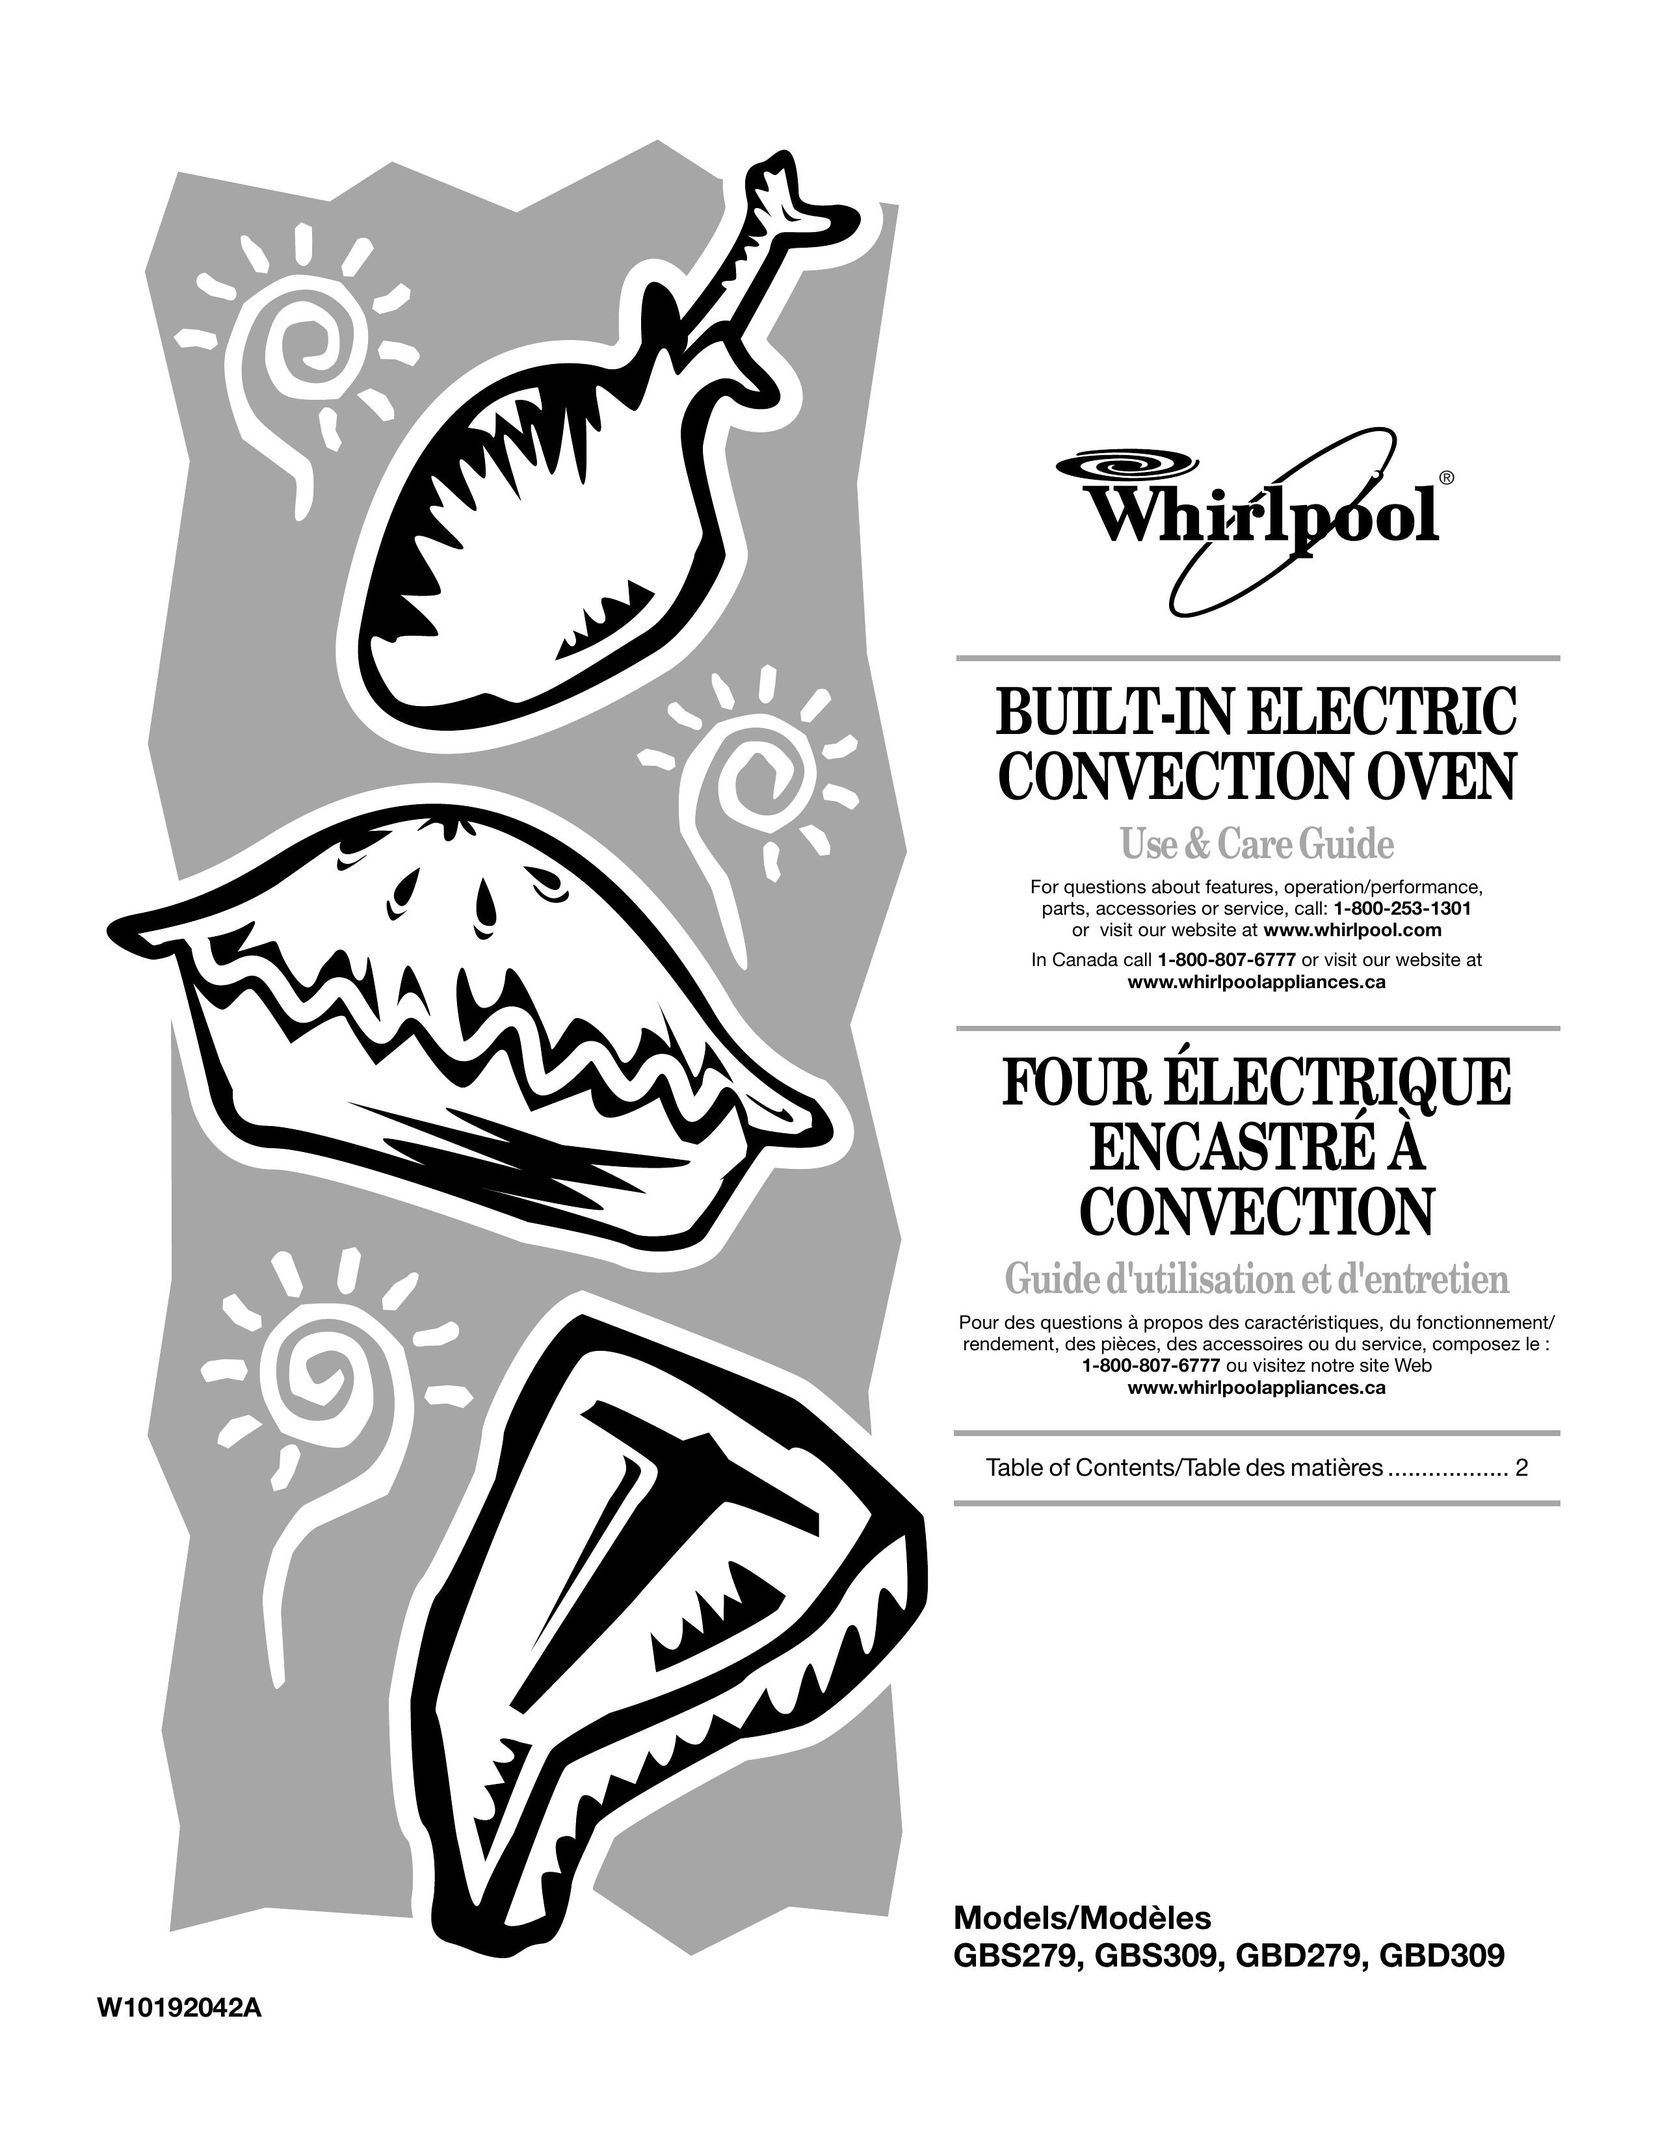 Whirlpool GBD279 Convection Oven User Manual